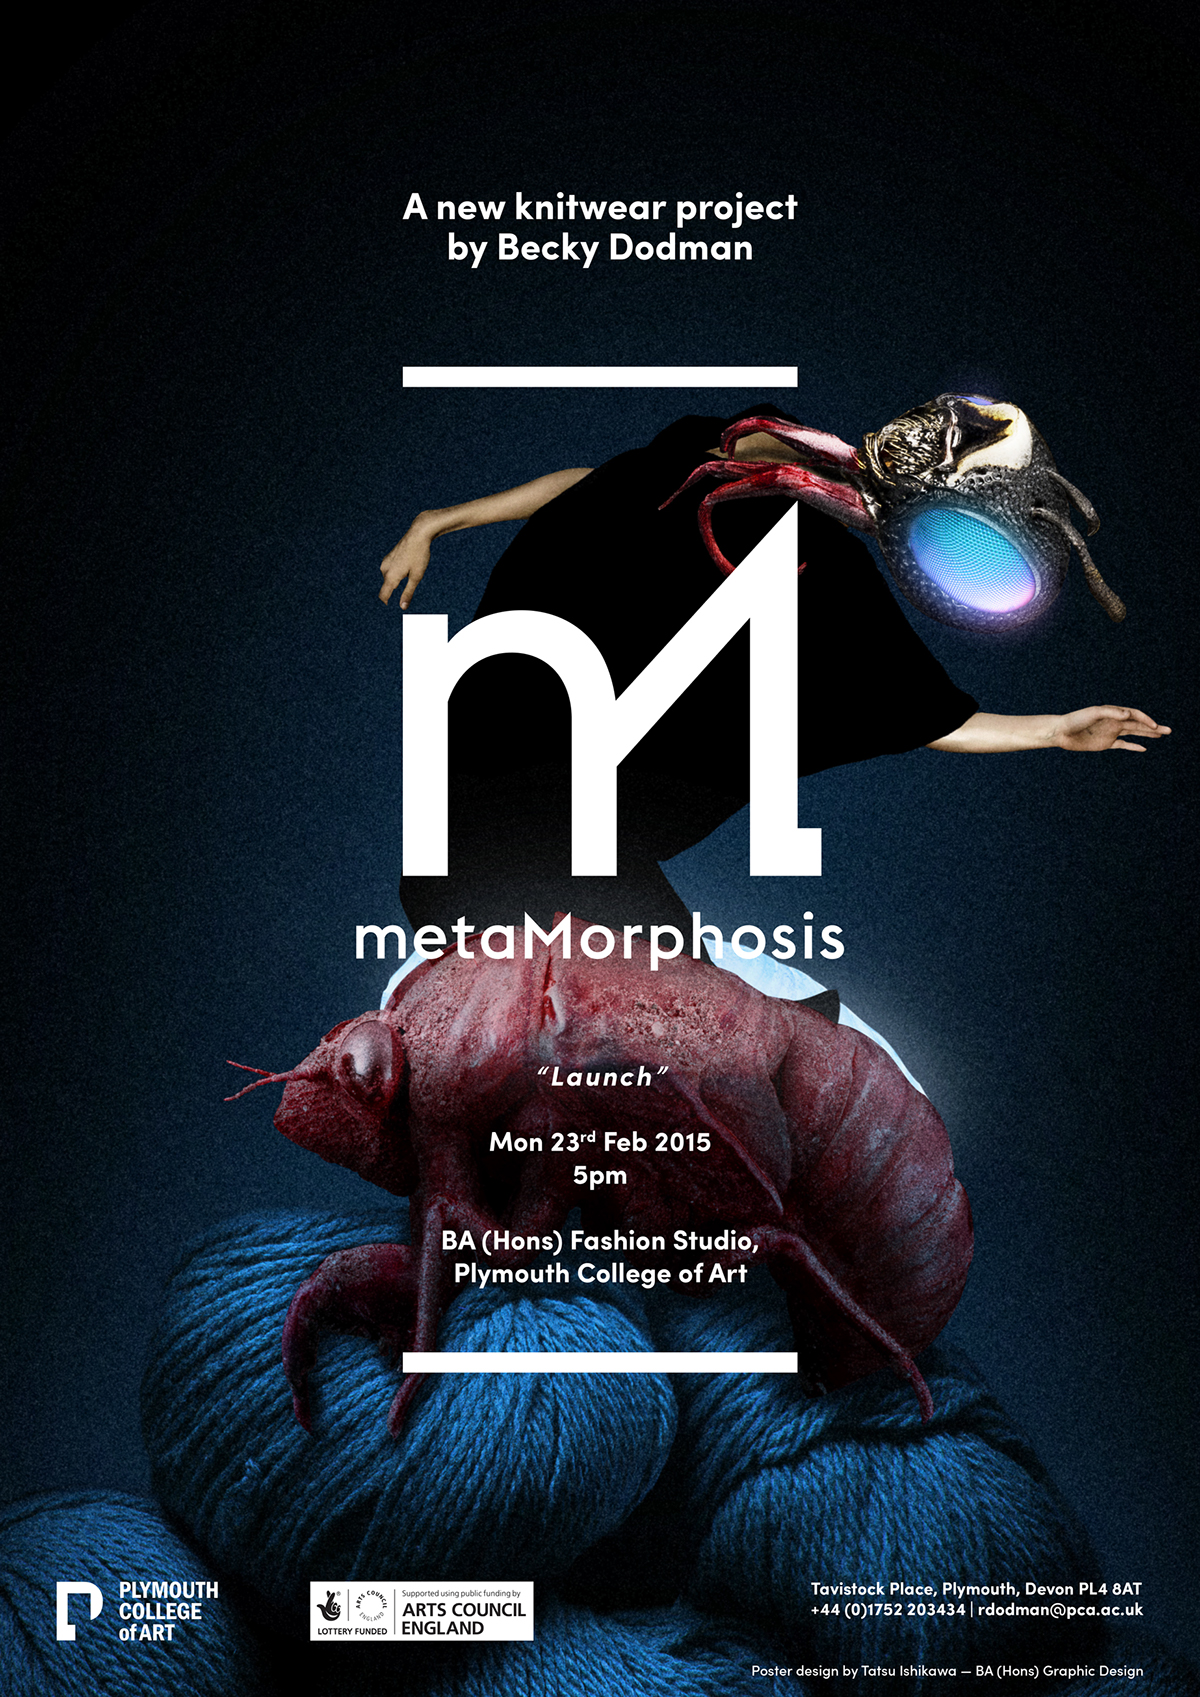 morph morphing Metamorphosis fashion branding logo poster glow-in-the-dark knit bugs Insects bug insect